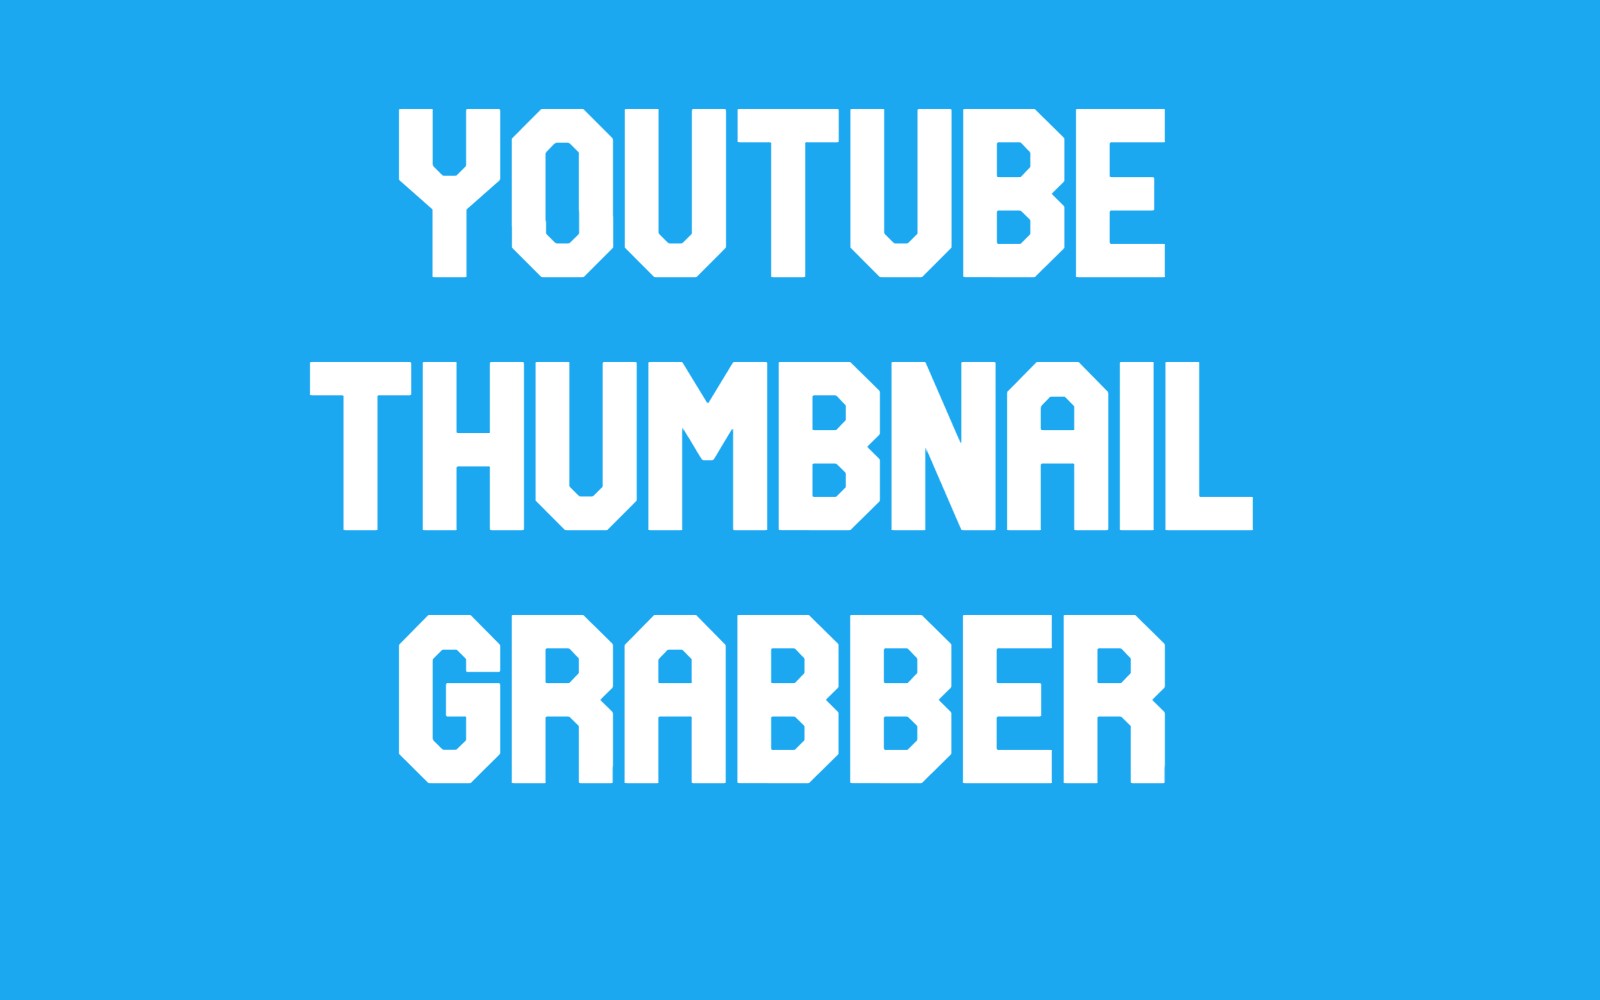 Best YouTube thumbnail viewer YT video grabber free online AR3school   Download youtube thumbnail images online of all qualified for free. This AR3school free tool lets you download any YT video thumbnails of all qualities. Just paste the URL of the thumbnail video in the below input and click Get Thumbnail HD Images.  YouTube thumbnail viewer YT video grabber online AR3school    How To Use YouTube Video Thumbnail Preview Viewer Grabber: Enter a YouTube Video URL / Link  Copy-paste any YouTube video URL    After you click on the ‘generate thumbnail preview’ button, we will display how your chosen thumbnail looks on desktop and mobile devices, across different placements and locations.